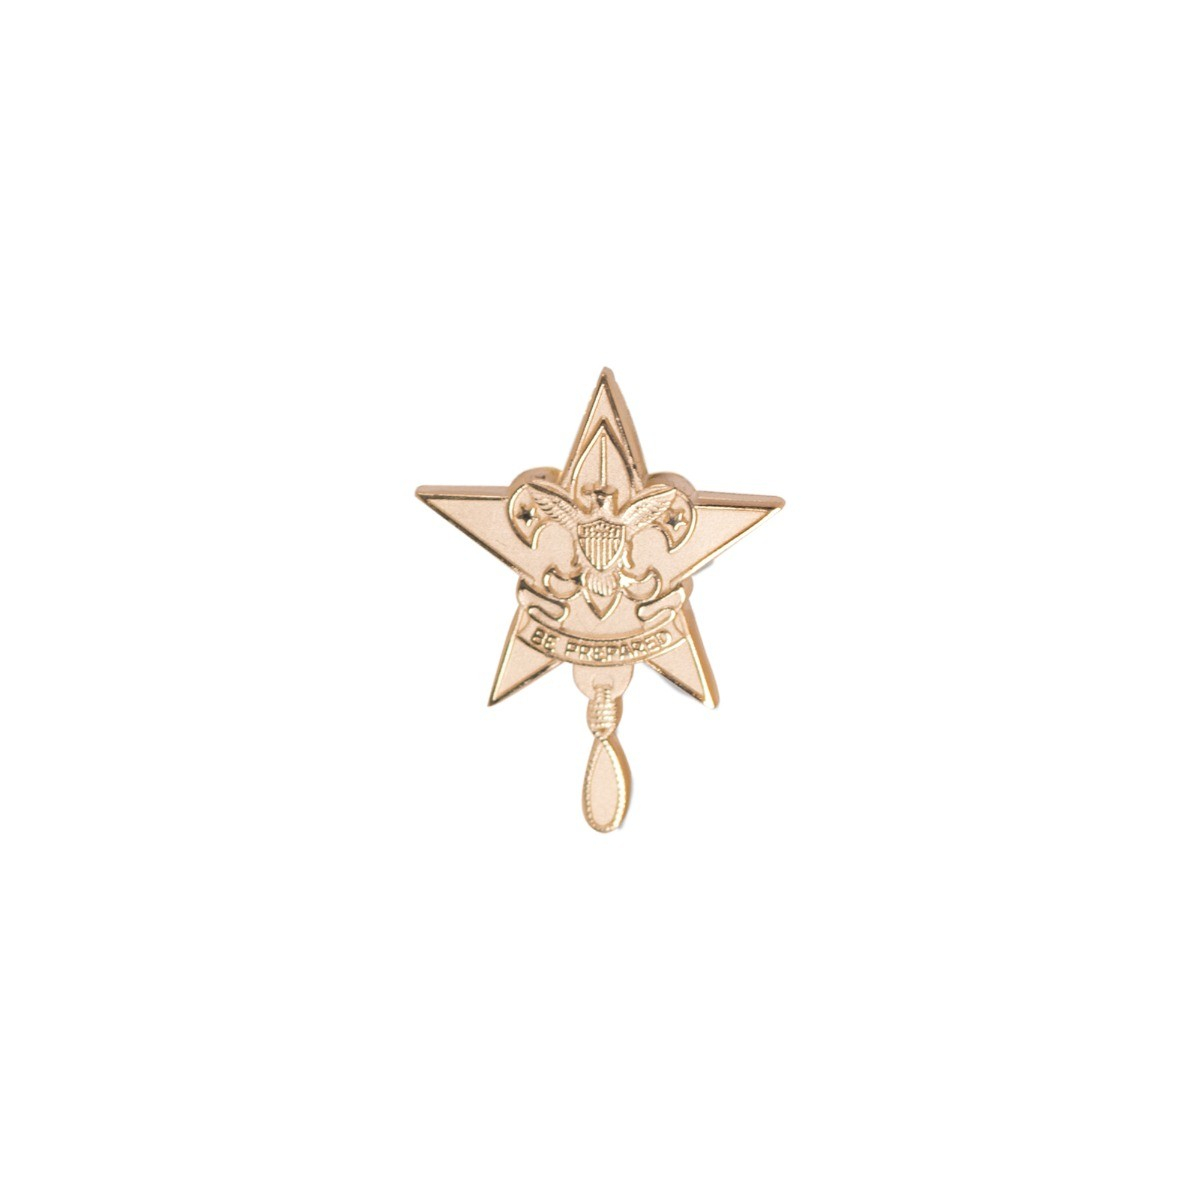 Star Scout Rank Pin